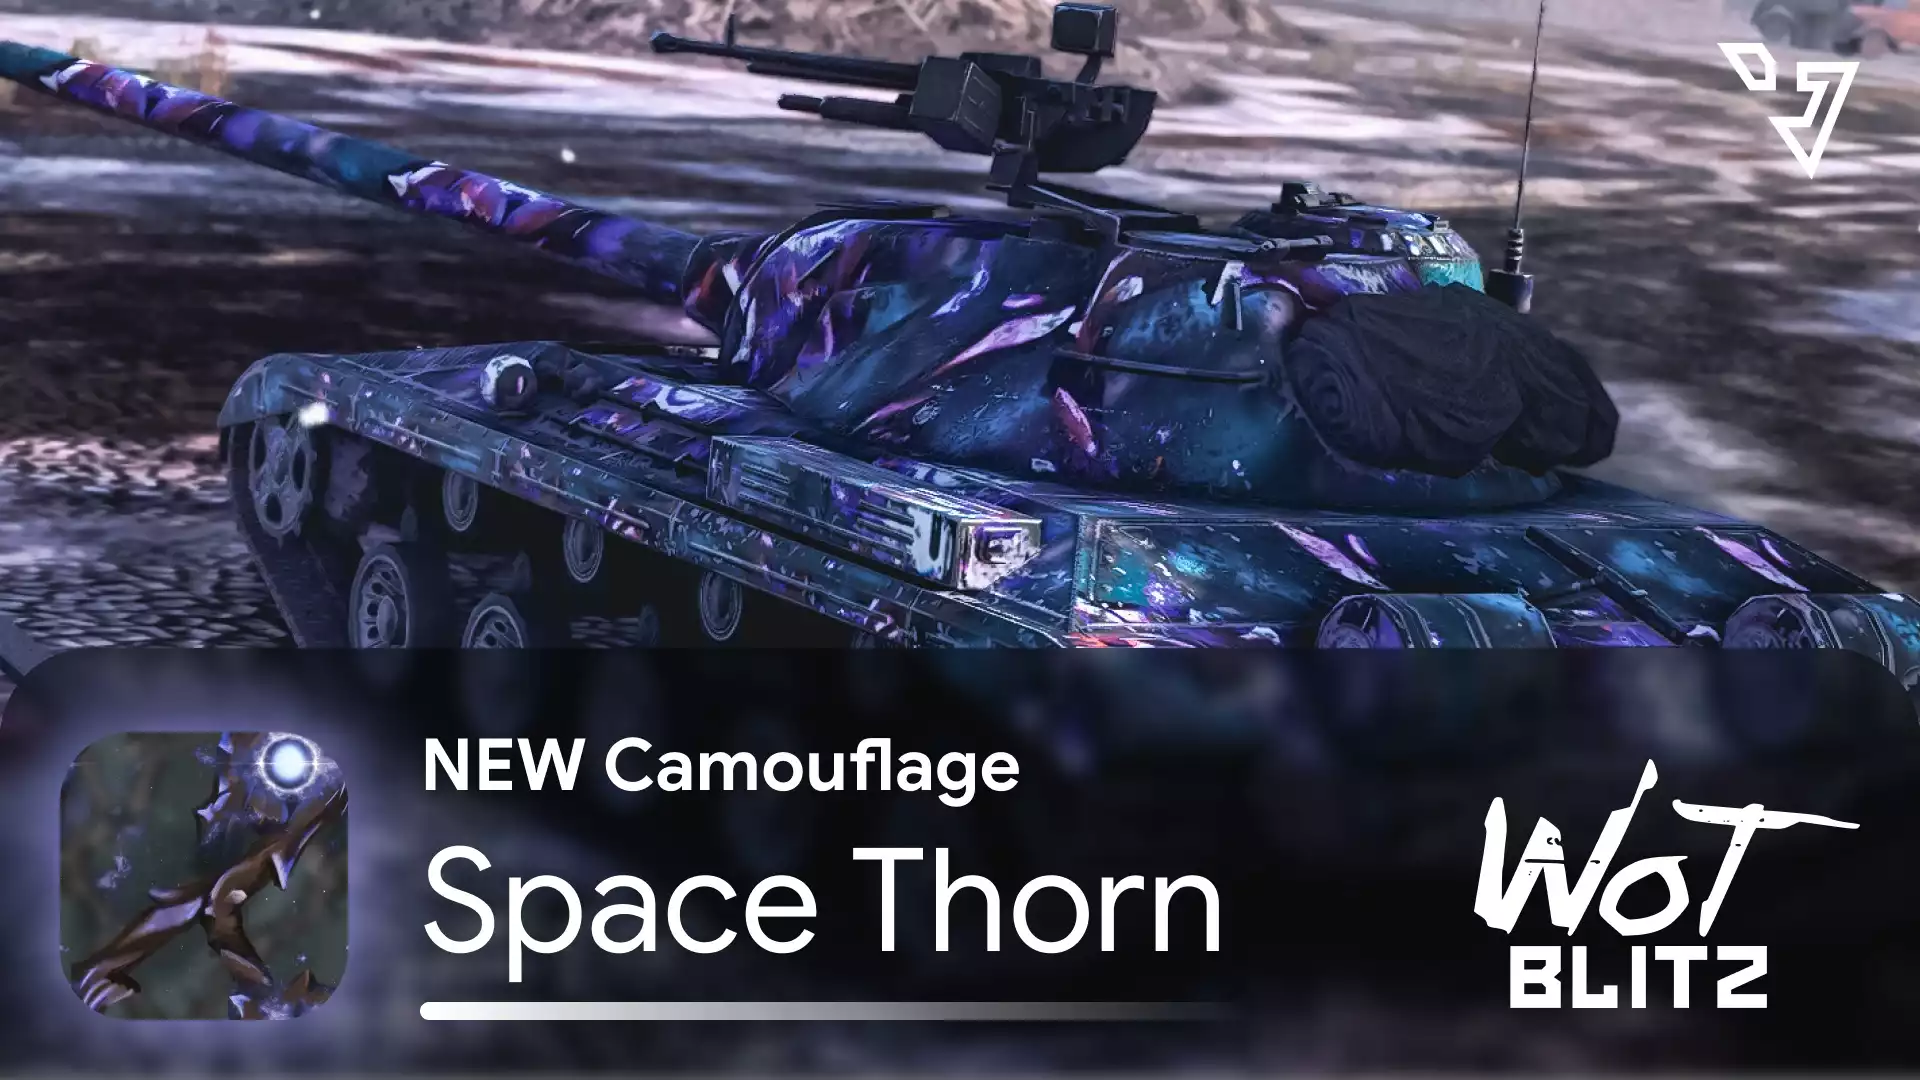 [UPD] Camouflage “Space Thorn”